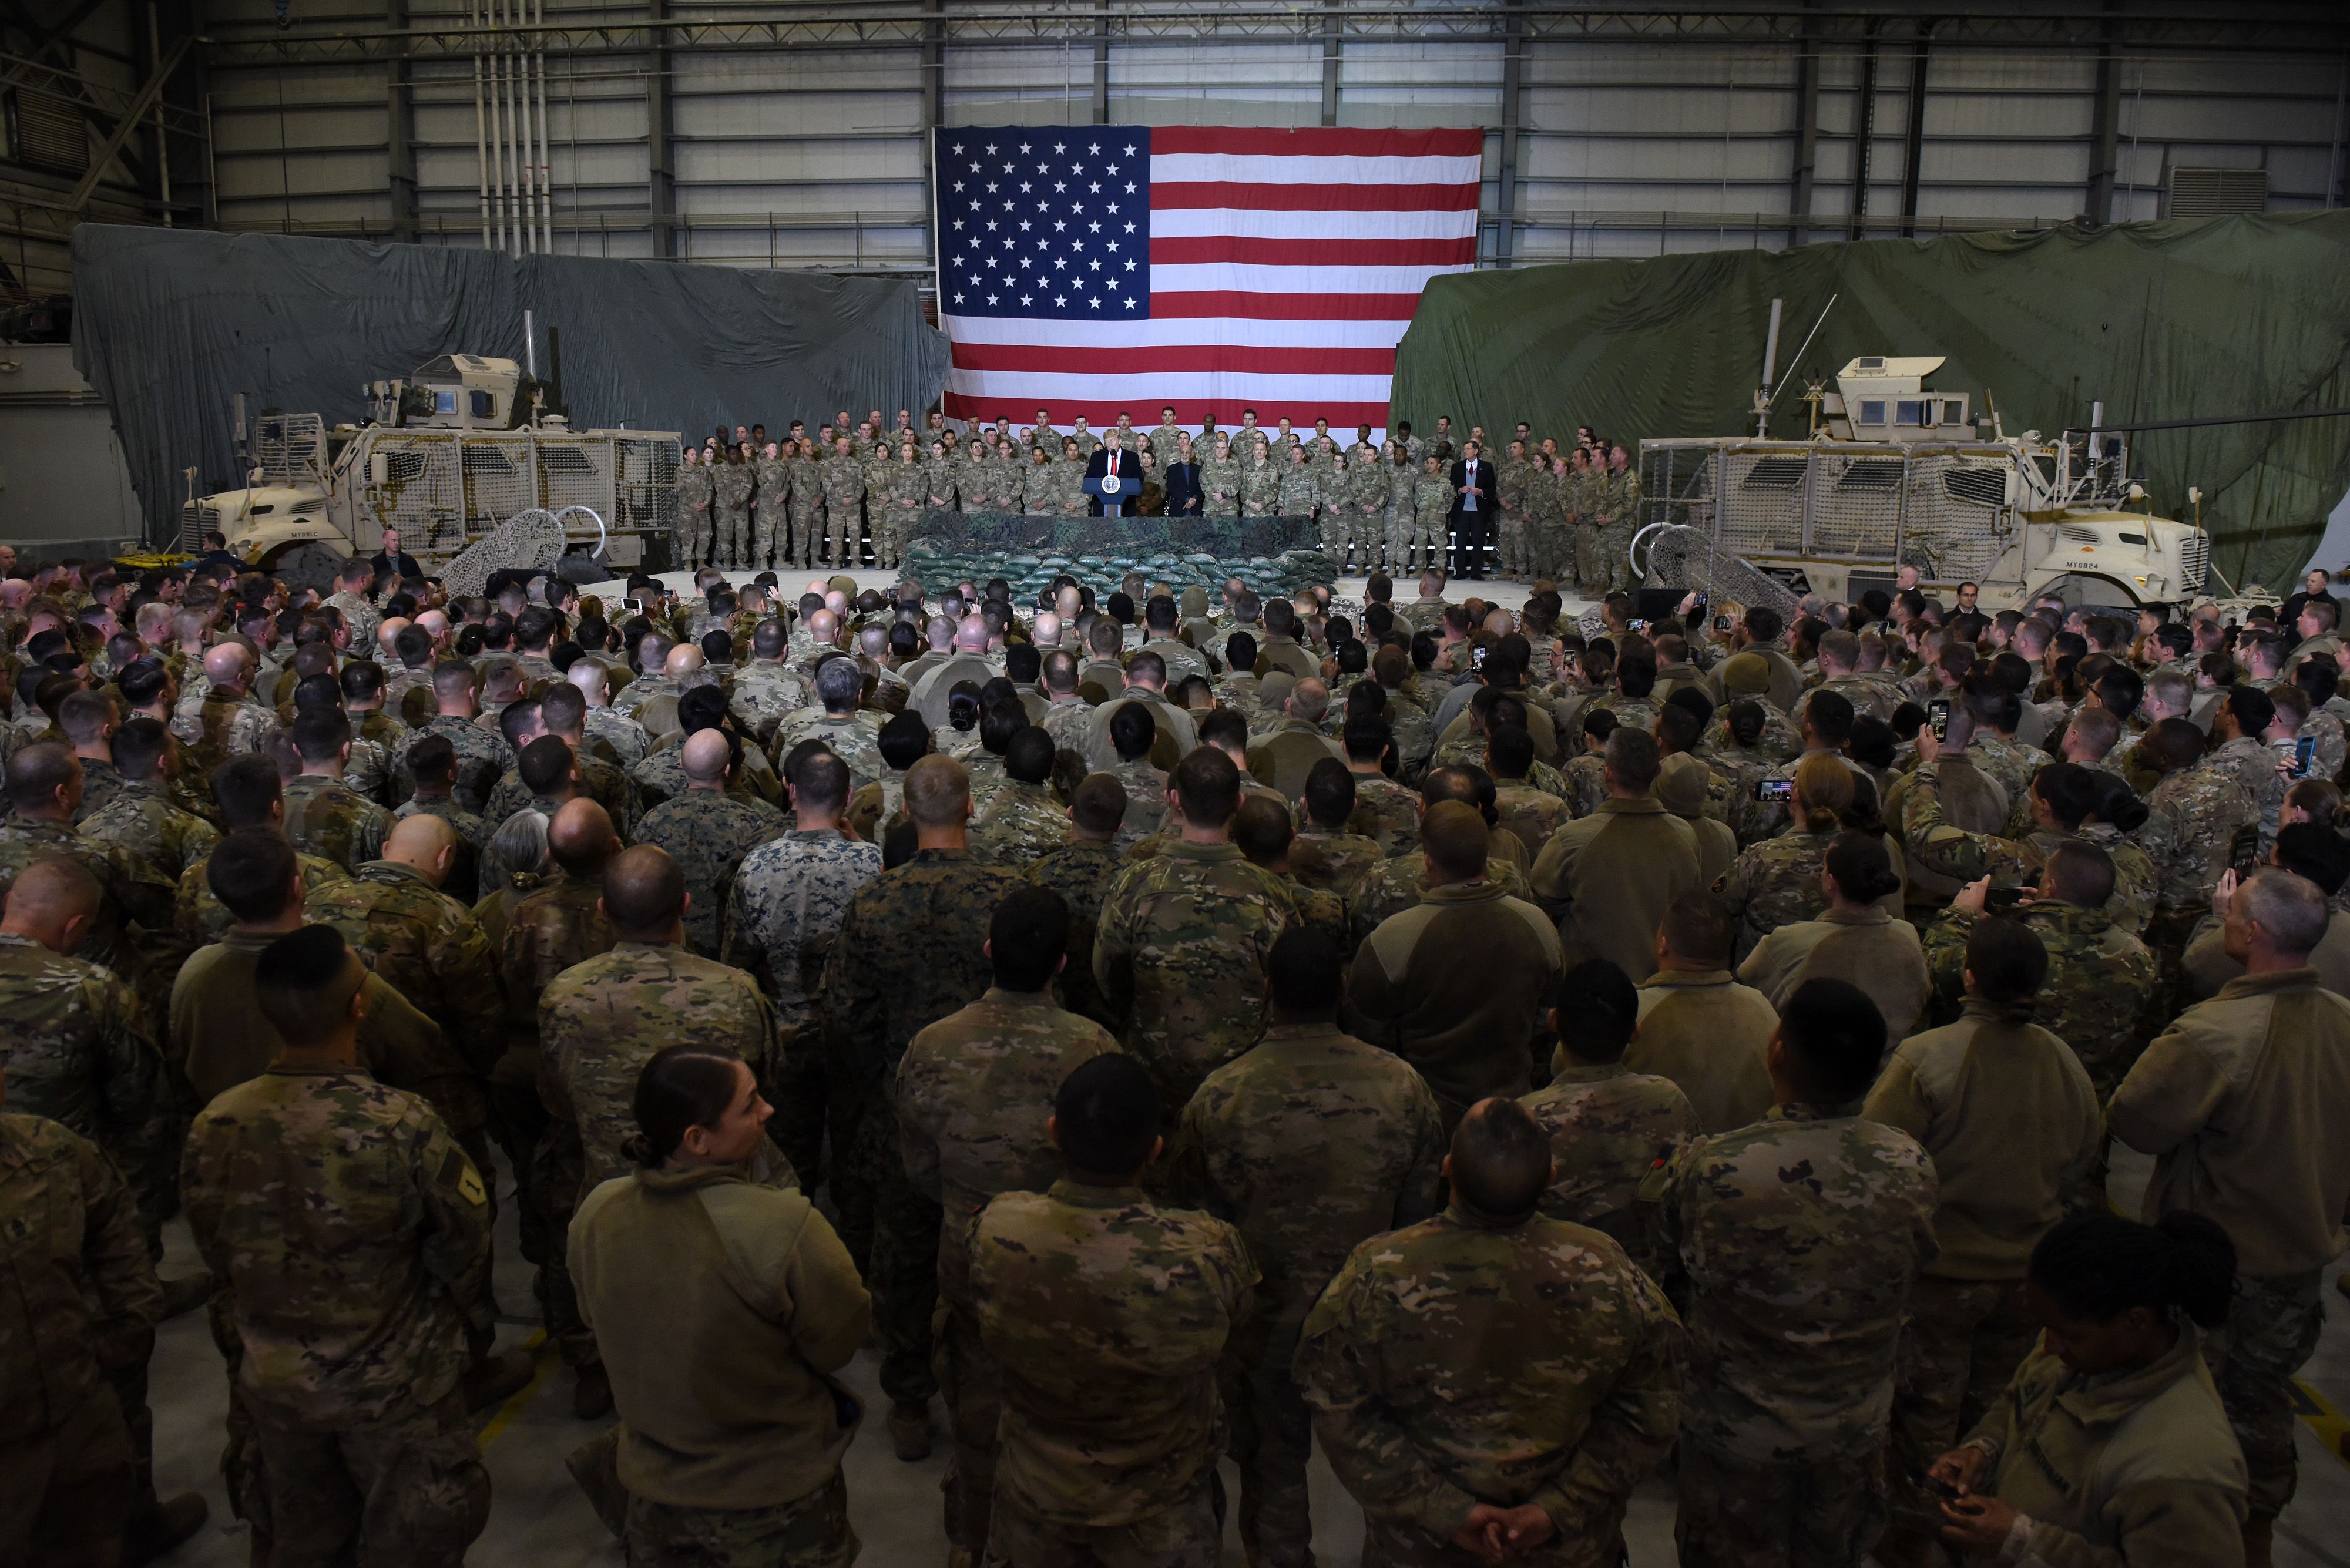 (FILES) In this file photo US President Donald Trump speaks to the troops during a surprise Thanksgiving day visit at Bagram Air Field, on November 28, 2019 in Afghanistan. - The US will cut its troops in Afghanistan to 2,500 in January, the lowest level in nearly two decades of war, as outgoing President Donald Trump follows through on a pledge to end conflicts abroad, the Pentagon announced on November 17, 2020. Acting Defense Secretary Chris Miller said around 2,000 troops would be pulled from the country by January 15, and 500 more would come back from Iraq, leaving 2,500 in each country. (Photo by Olivier Douliery / AFP)